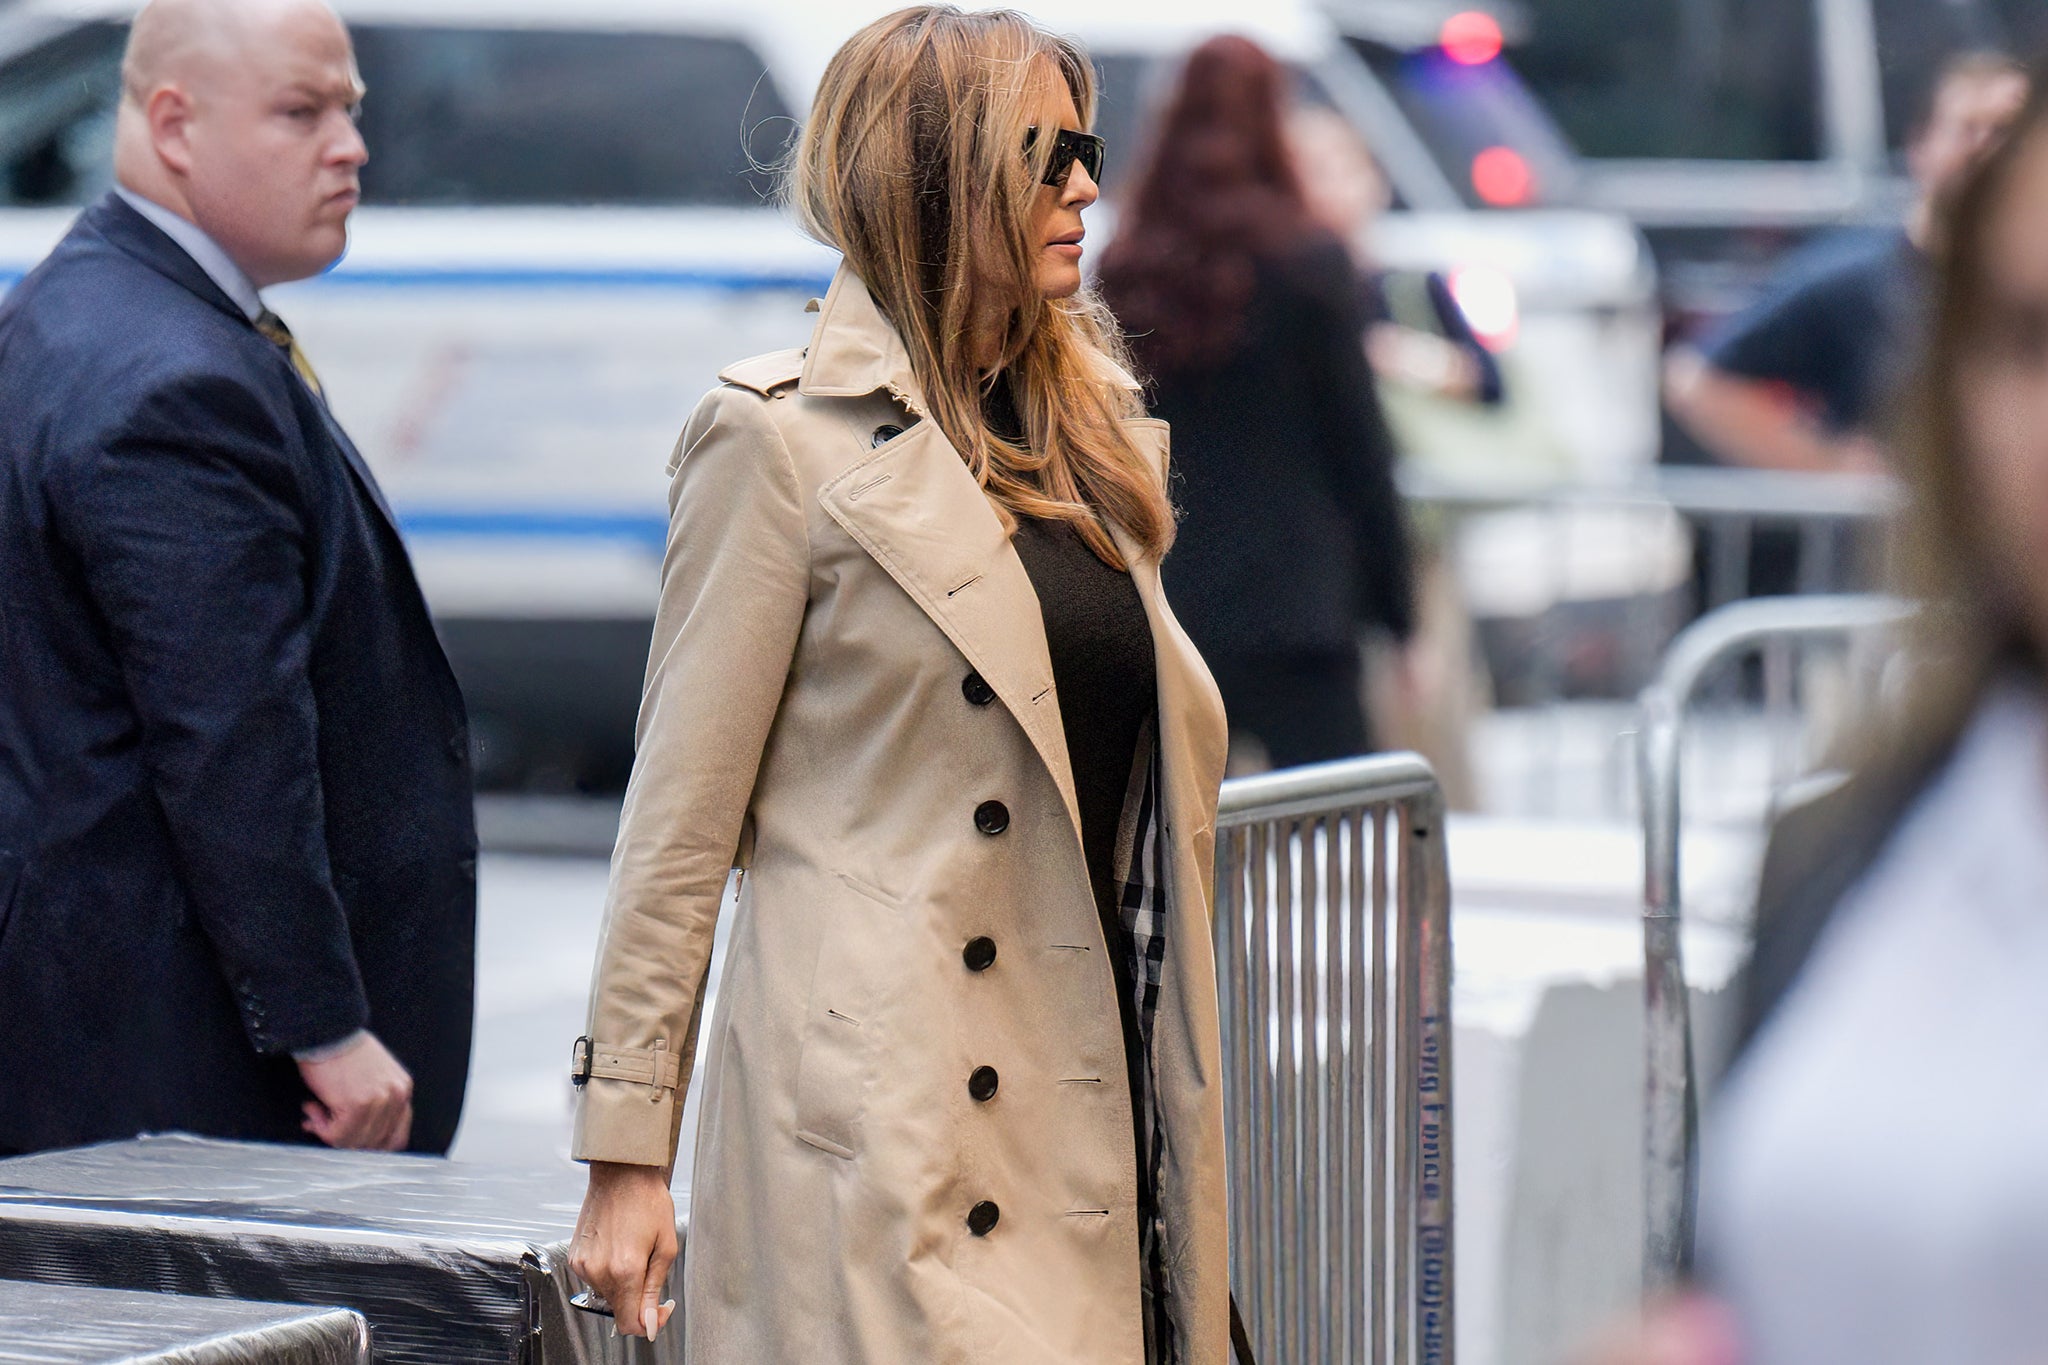 Former First Lady Melania Trump arrives at Trump Tower in Manhattan on 12 June 2023